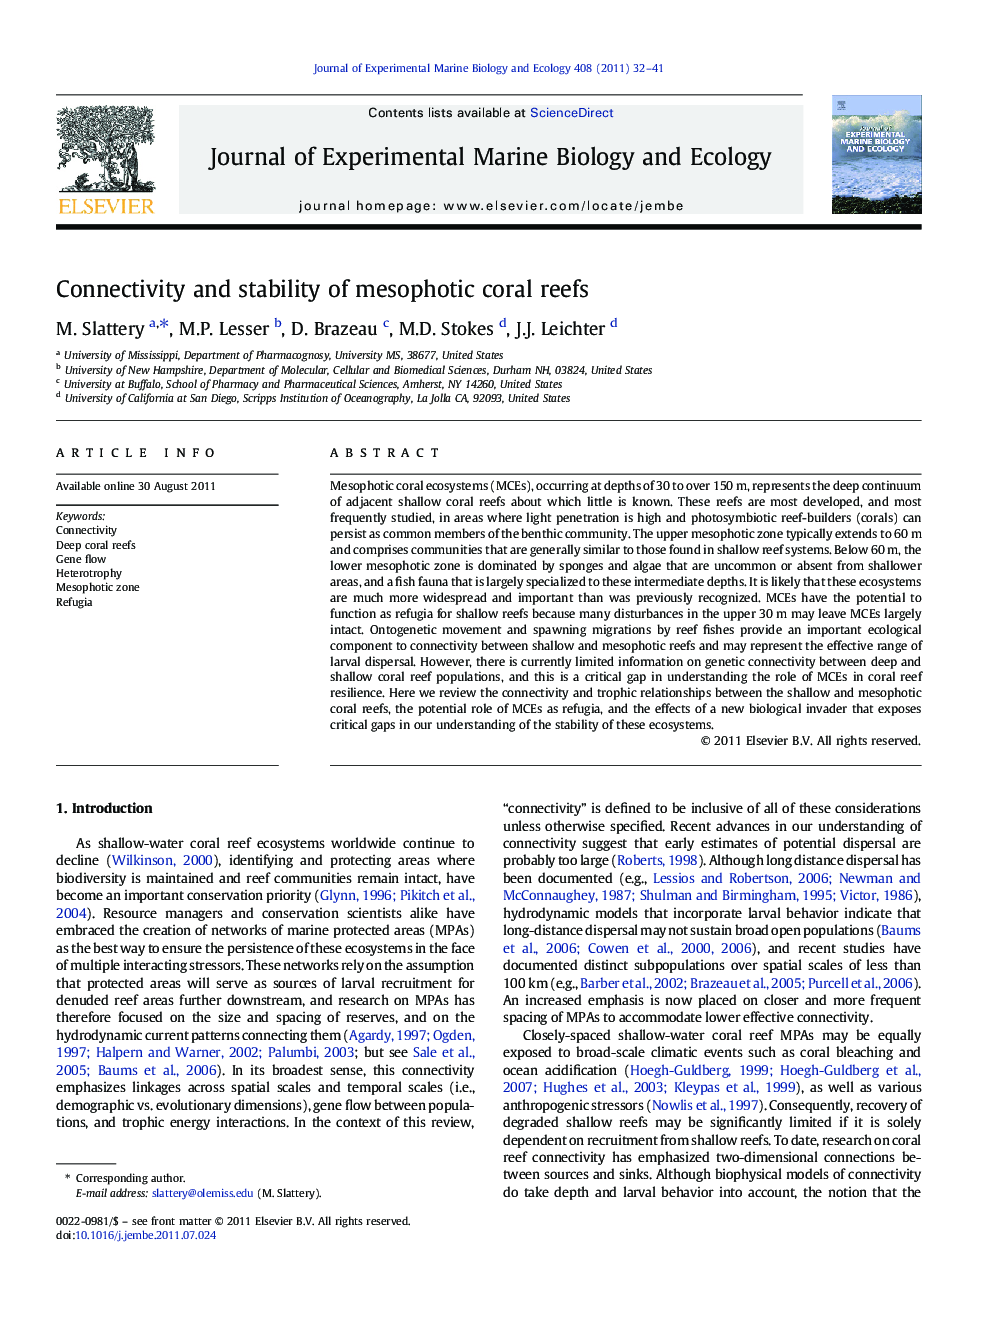 Connectivity and stability of mesophotic coral reefs